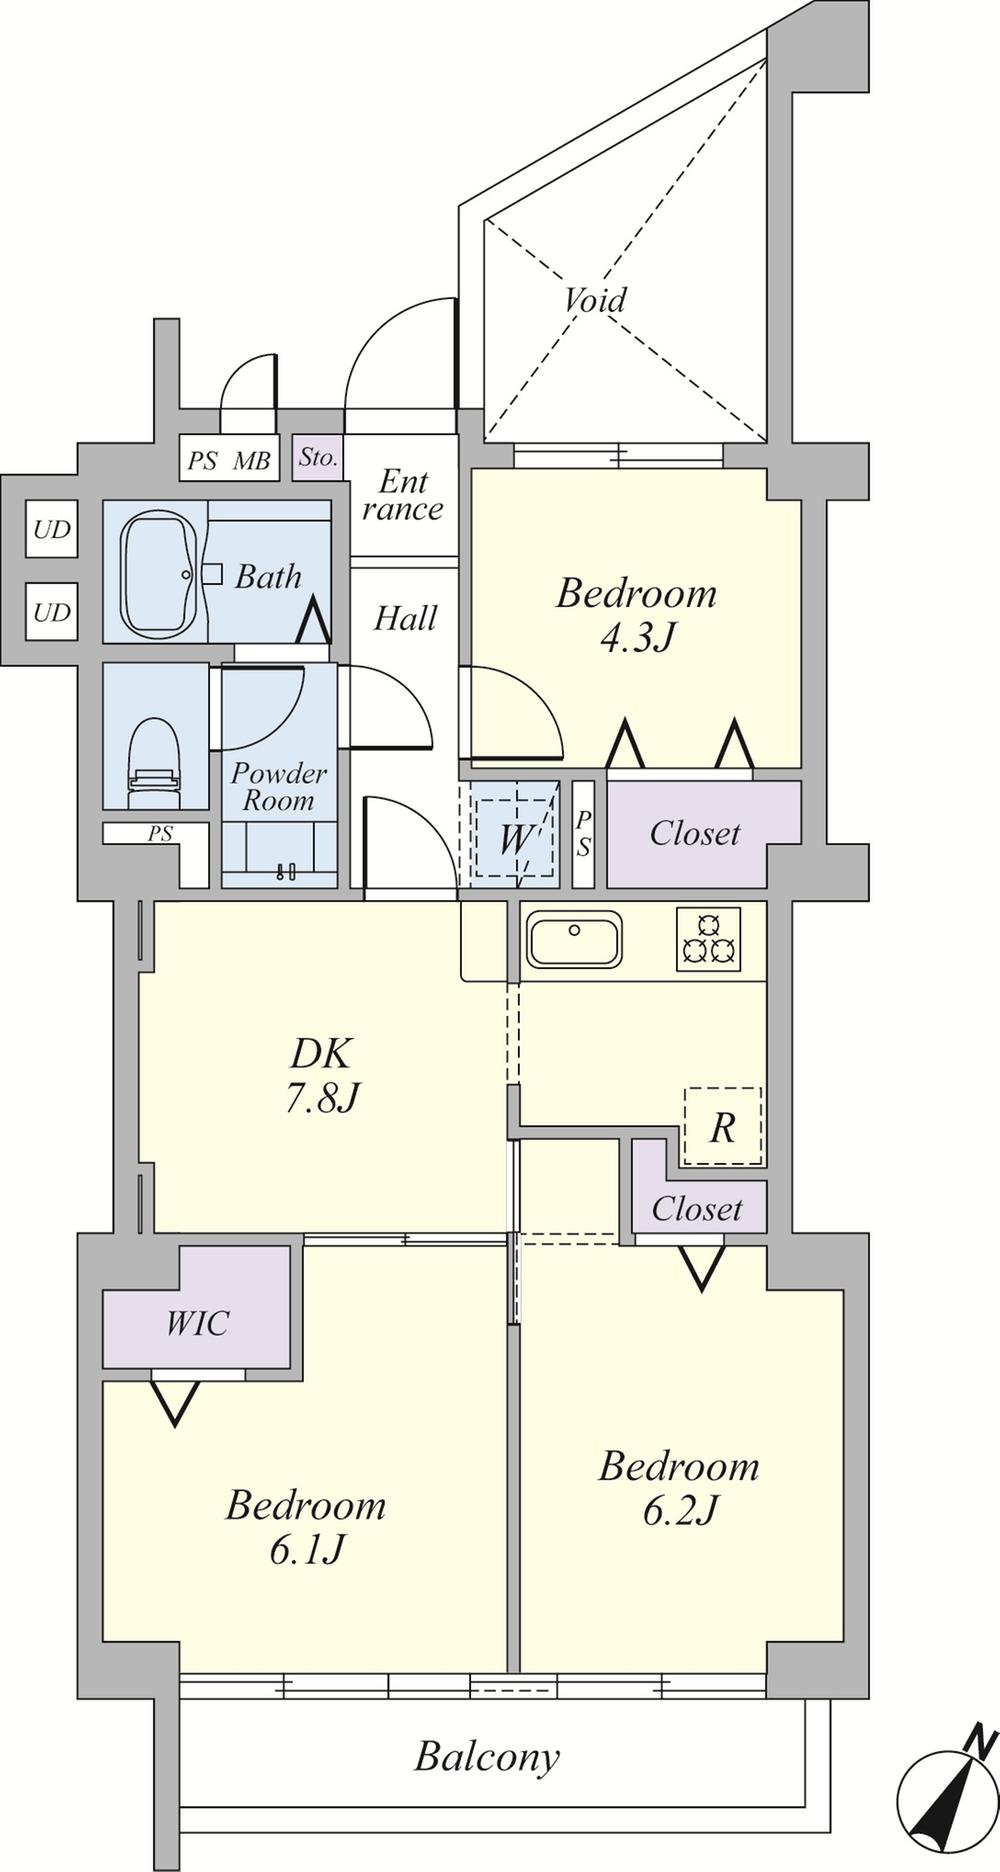 Floor plan. 3DK, Price 19,800,000 yen, Occupied area 54.69 sq m , Balcony area 4.85 sq m storage rich room. The room the entire renovation